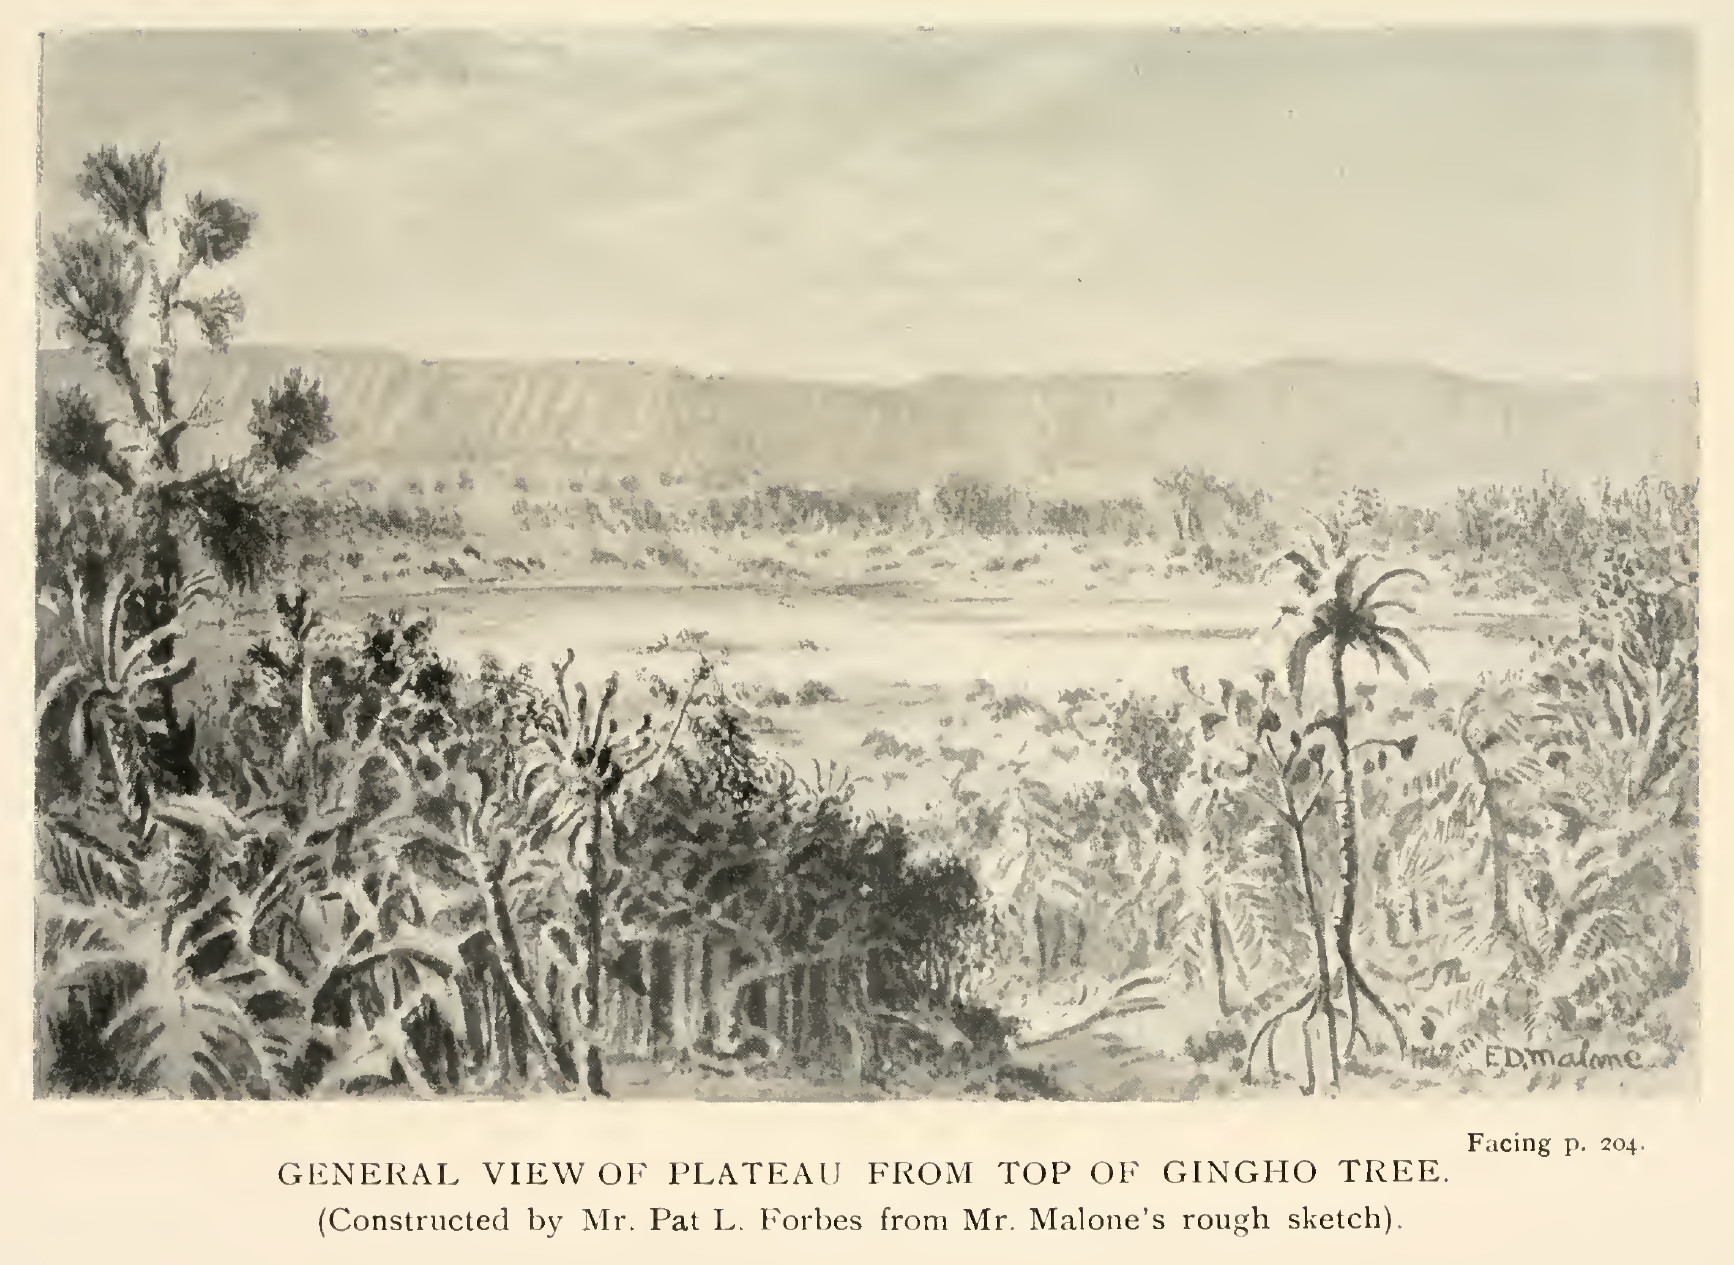 General view of the plateau from the top of the Gingho Tree